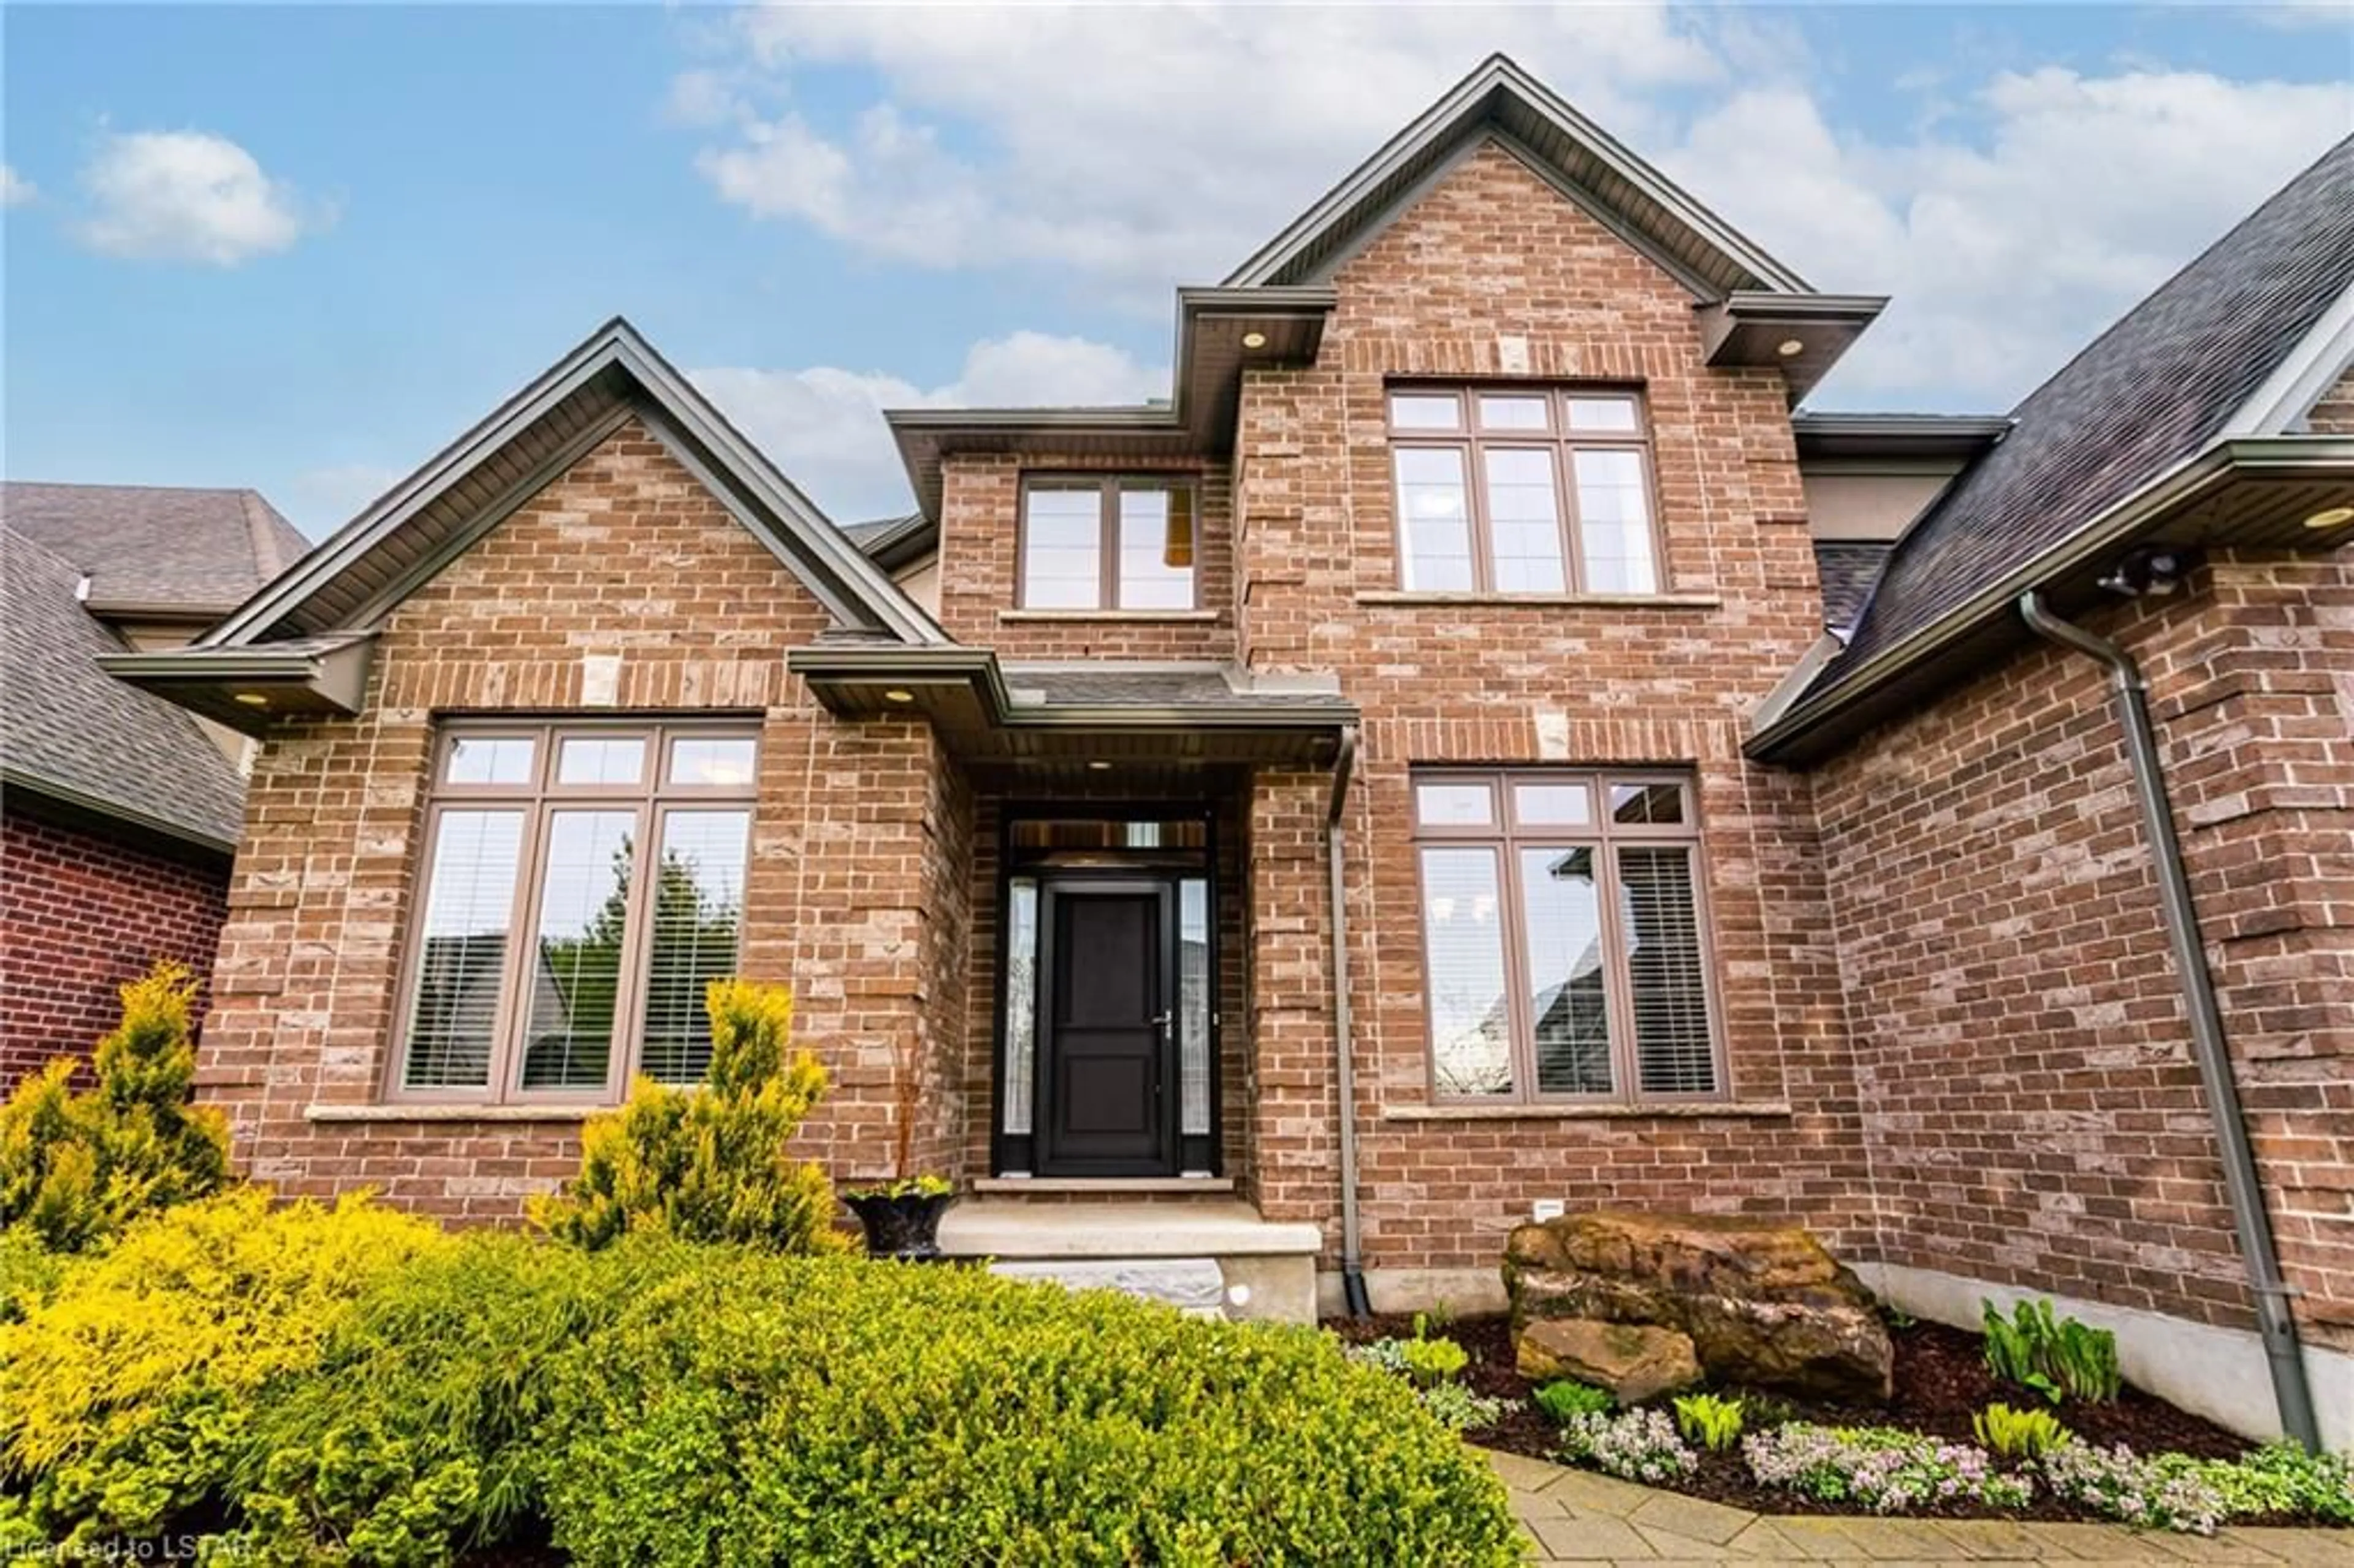 Home with brick exterior material for 2445 Kains Rd, London Ontario N6K 0C1